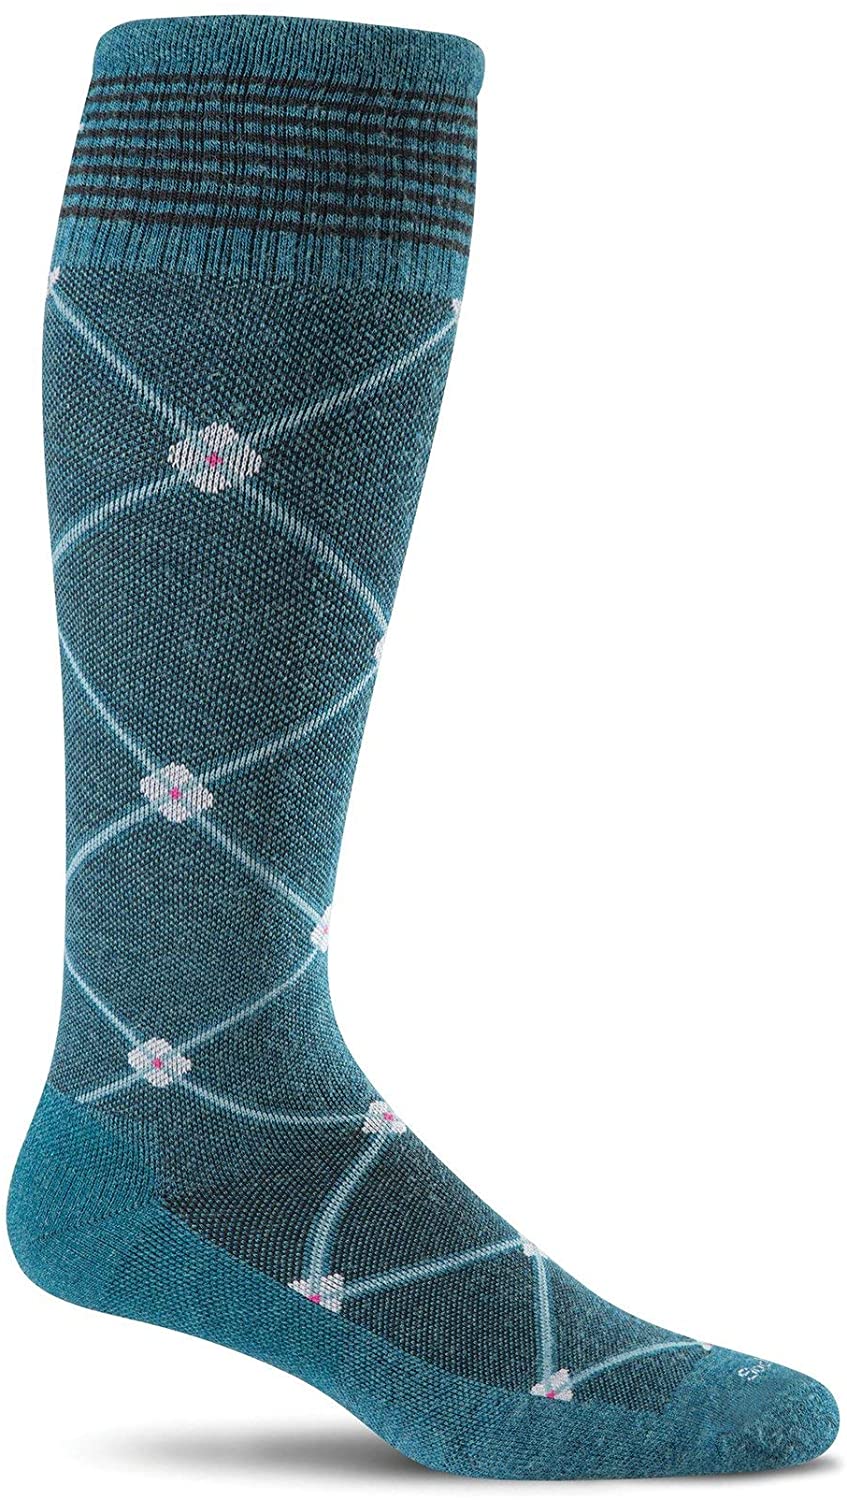 Sockwell Women's Elevation Sock in Teal color from the side